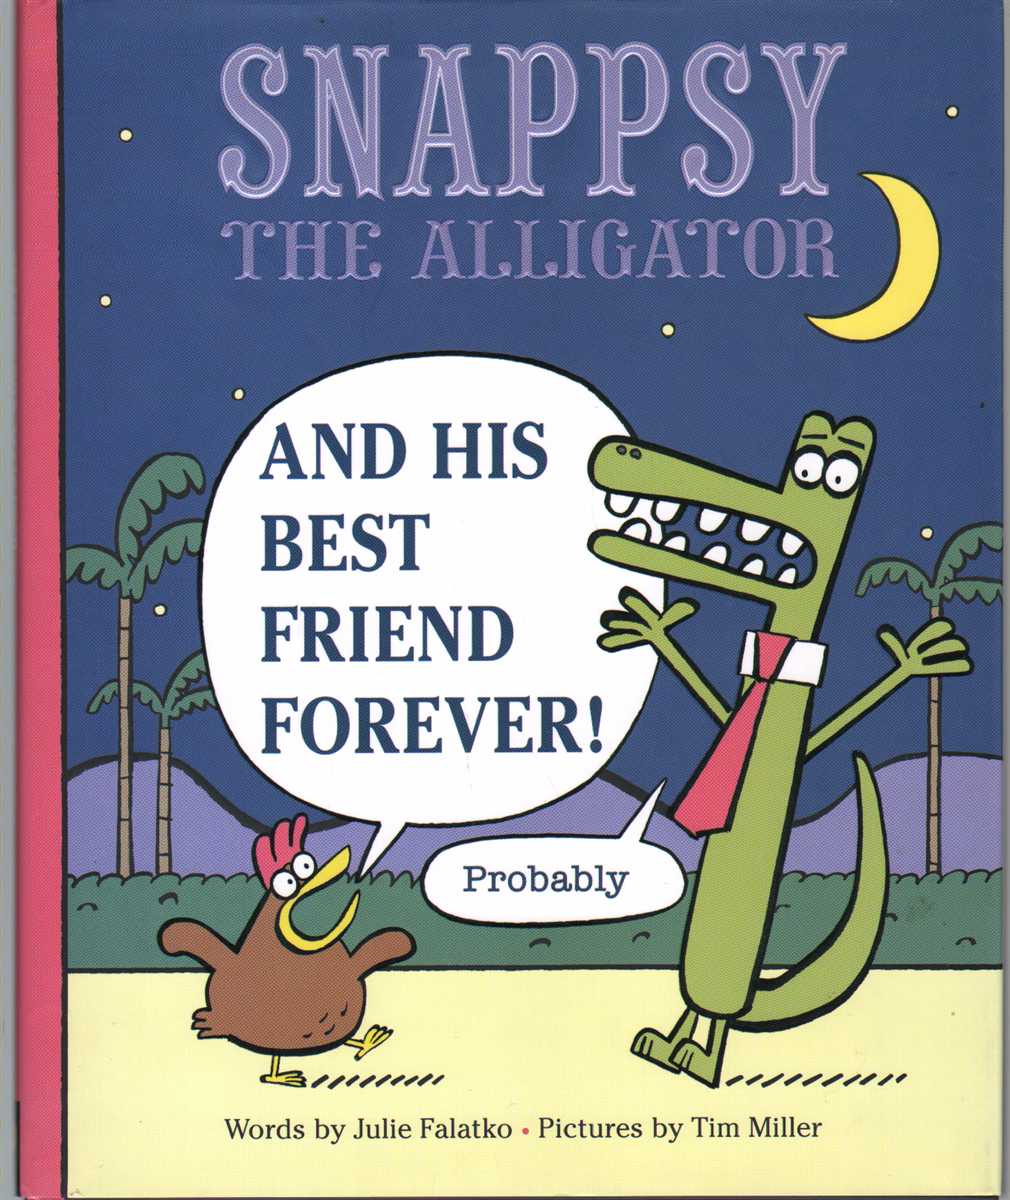 Falatko, Julie - SNAPPSY THE ALLIGATOR AND HIS BEST FRIEND FOREVER Probably